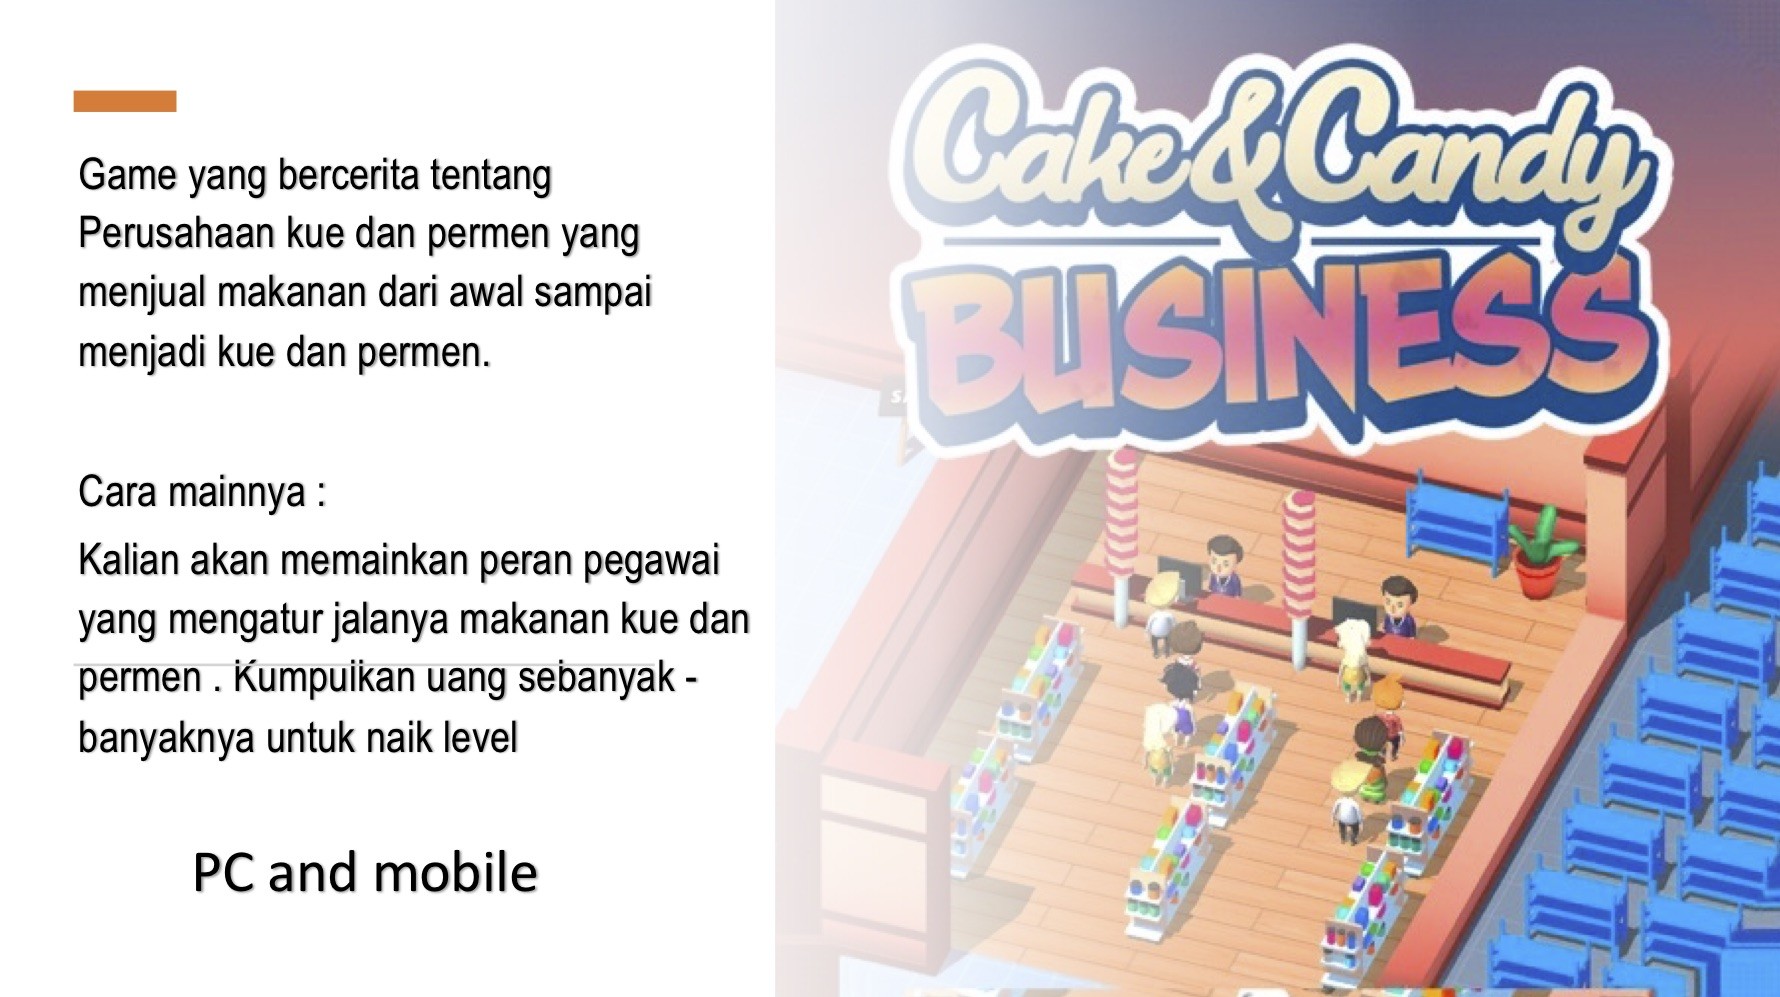 https://www.crazygames.com/game/cake-and-candy-business-tycoon